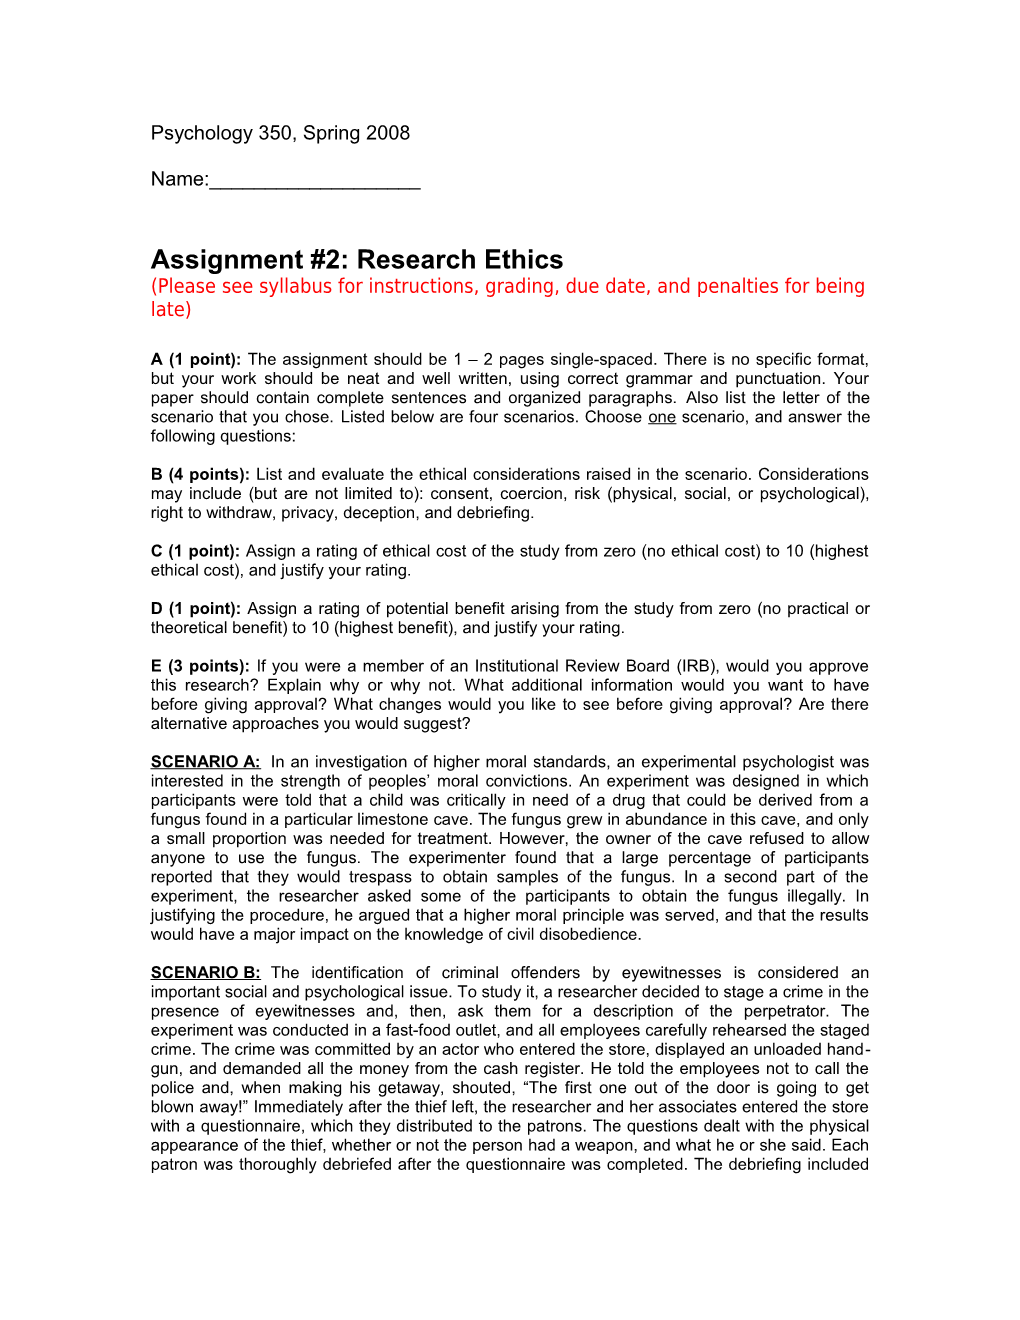 Assignment #2: Research Ethics